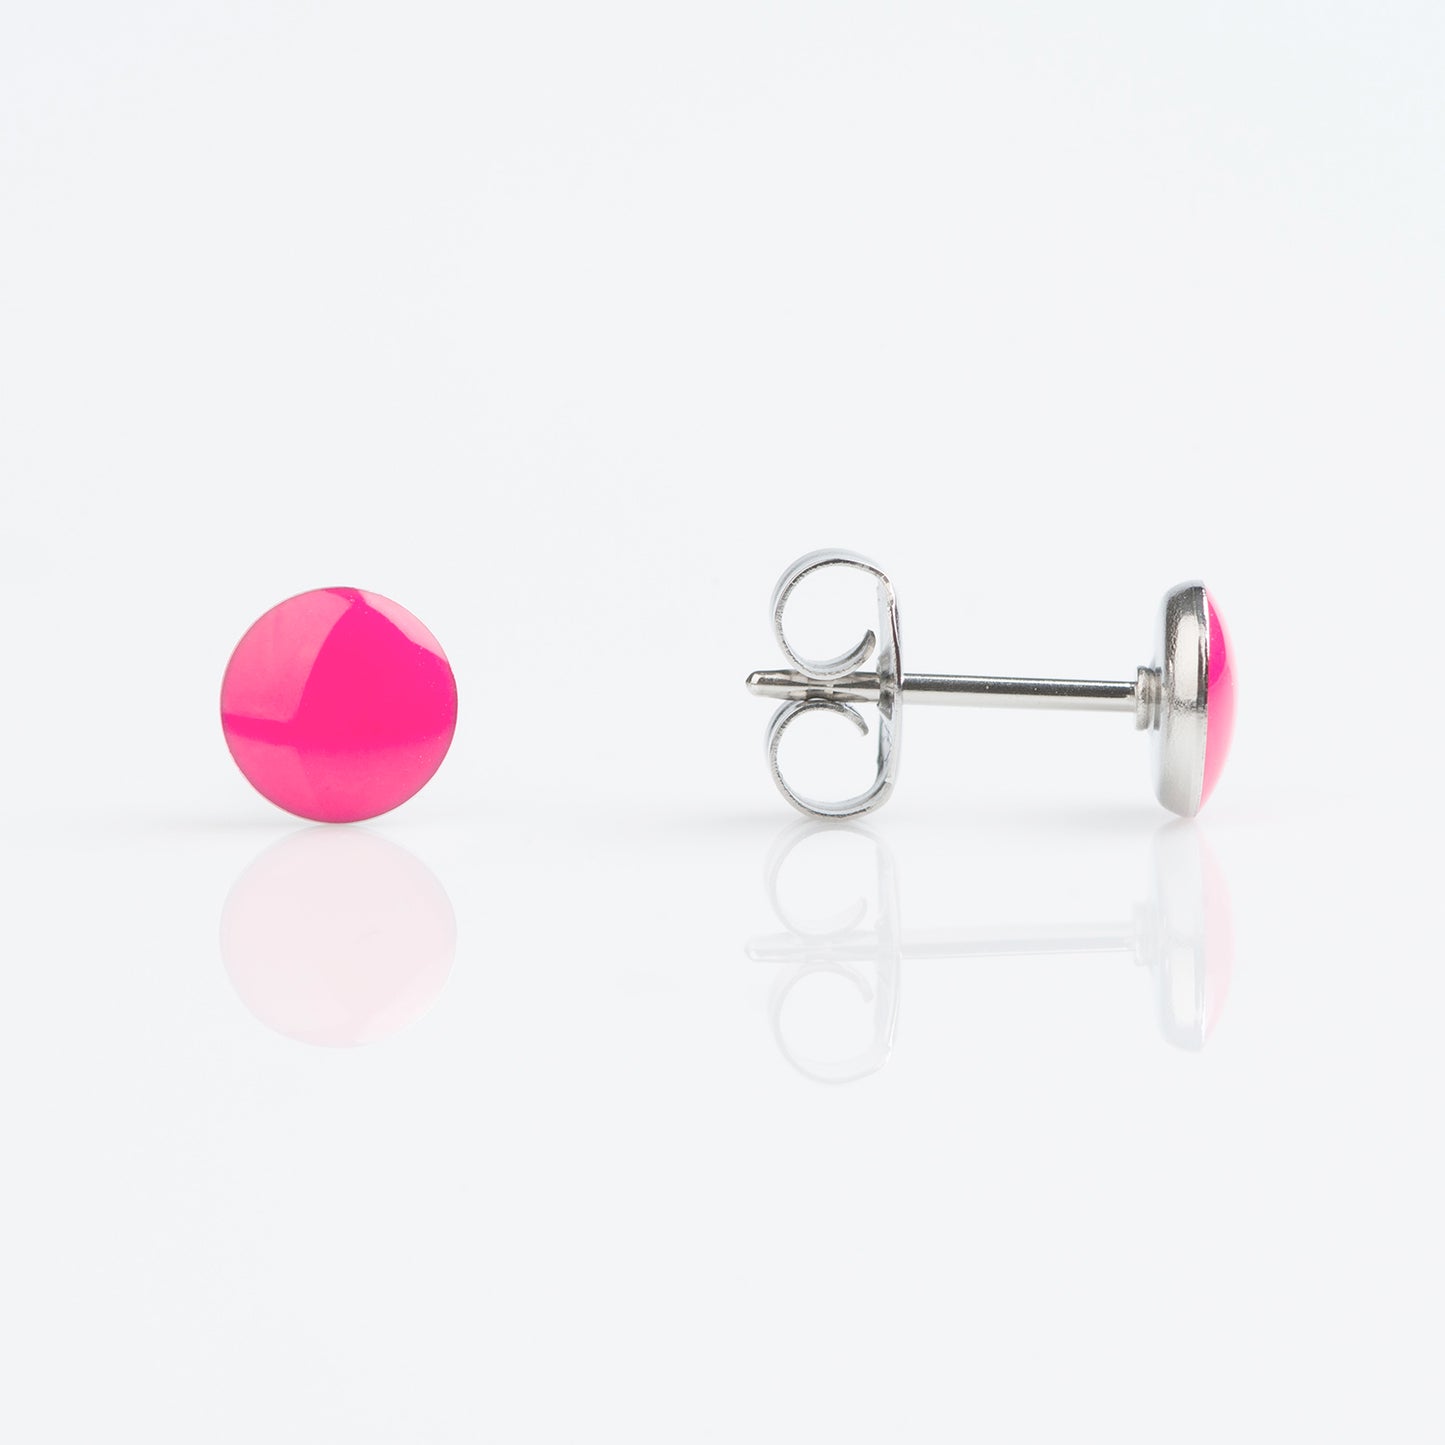 STUDEX Tiny Tips Stainless Steel 5mm Novelty Neon Hot Pink Button